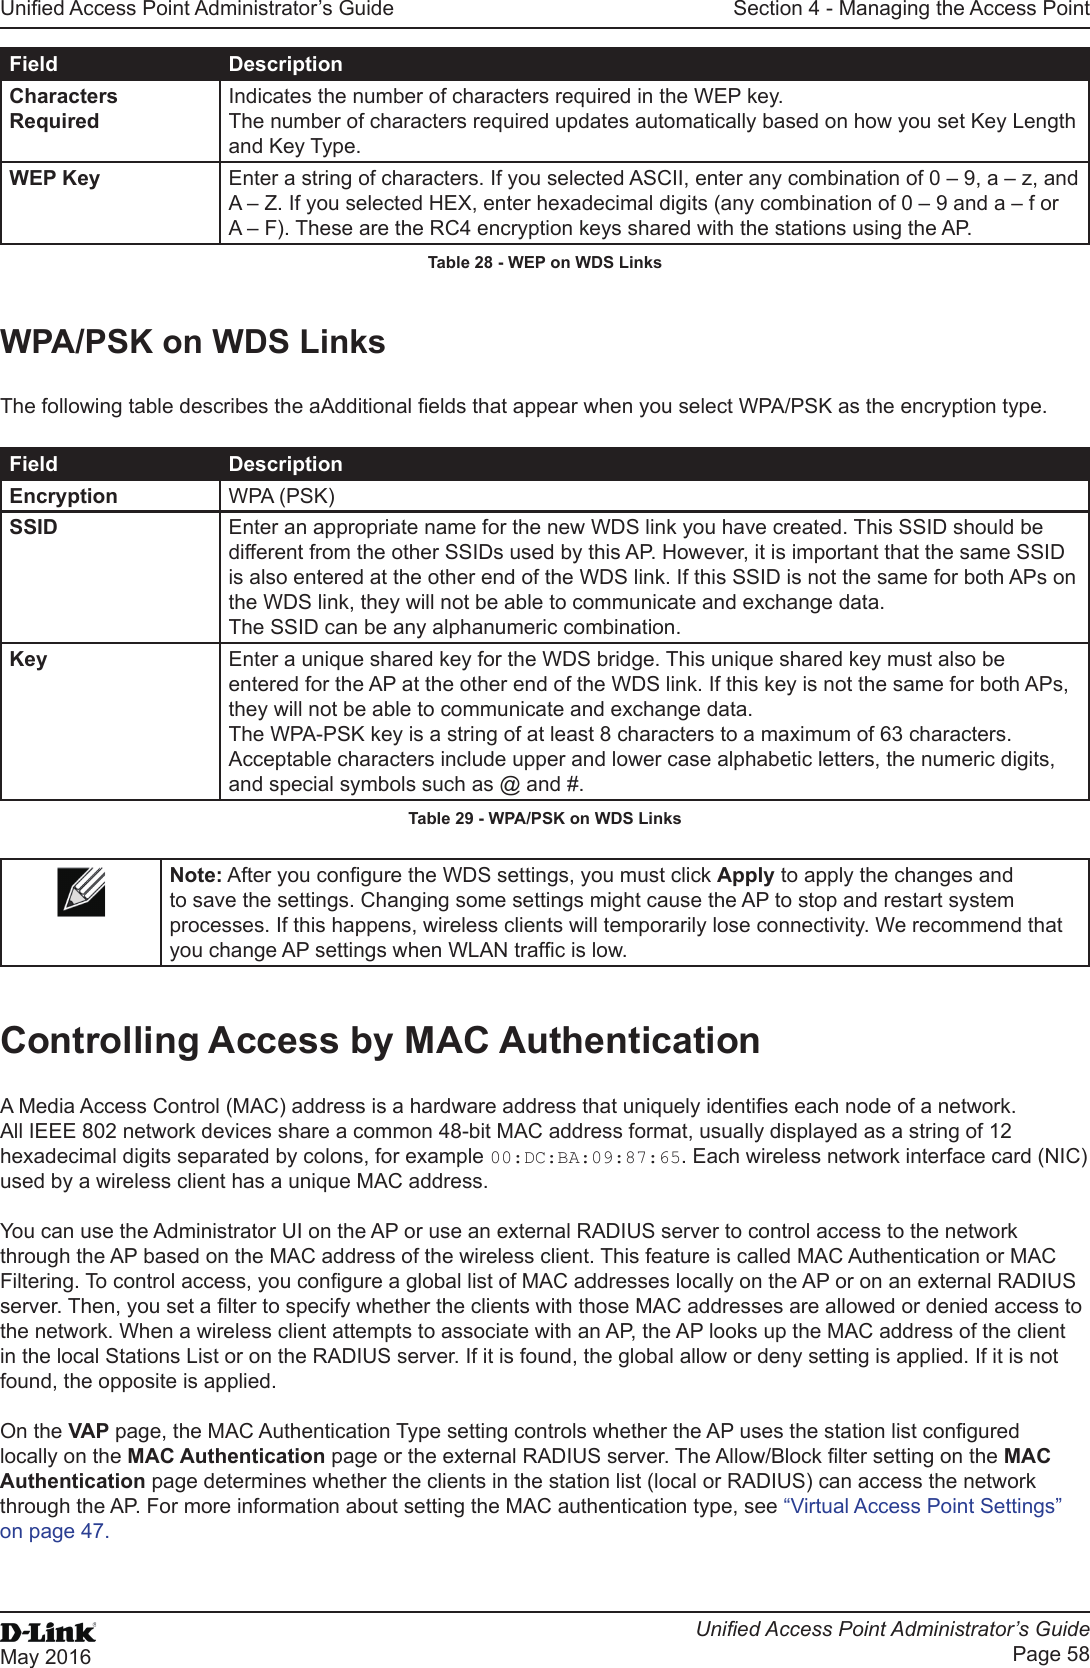 Unied Access Point Administrator’s GuideUnied Access Point Administrator’s GuidePage 58May 2016Section 4 - Managing the Access PointField DescriptionCharacters RequiredIndicates the number of characters required in the WEP key.The number of characters required updates automatically based on how you set Key Length and Key Type.WEP Key Enter a string of characters. If you selected ASCII, enter any combination of 0 – 9, a – z, and A – Z. If you selected HEX, enter hexadecimal digits (any combination of 0 – 9 and a – f or A – F). These are the RC4 encryption keys shared with the stations using the AP.Table 28 - WEP on WDS LinksWPA/PSK on WDS LinksThe following table describes the aAdditional elds that appear when you select WPA/PSK as the encryption type.Field DescriptionEncryption WPA (PSK)SSID Enter an appropriate name for the new WDS link you have created. This SSID should be different from the other SSIDs used by this AP. However, it is important that the same SSID is also entered at the other end of the WDS link. If this SSID is not the same for both APs on the WDS link, they will not be able to communicate and exchange data.The SSID can be any alphanumeric combination.Key Enter a unique shared key for the WDS bridge. This unique shared key must also be entered for the AP at the other end of the WDS link. If this key is not the same for both APs, they will not be able to communicate and exchange data.The WPA-PSK key is a string of at least 8 characters to a maximum of 63 characters. Acceptable characters include upper and lower case alphabetic letters, the numeric digits, and special symbols such as @ and #.Table 29 - WPA/PSK on WDS LinksNote: After you congure the WDS settings, you must click Apply to apply the changes and to save the settings. Changing some settings might cause the AP to stop and restart system processes. If this happens, wireless clients will temporarily lose connectivity. We recommend that you change AP settings when WLAN trafc is low. Controlling Access by MAC AuthenticationA Media Access Control (MAC) address is a hardware address that uniquely identies each node of a network. All IEEE 802 network devices share a common 48-bit MAC address format, usually displayed as a string of 12 hexadecimal digits separated by colons, for example 00:DC:BA:09:87:65. Each wireless network interface card (NIC) used by a wireless client has a unique MAC address.You can use the Administrator UI on the AP or use an external RADIUS server to control access to the network through the AP based on the MAC address of the wireless client. This feature is called MAC Authentication or MAC Filtering. To control access, you congure a global list of MAC addresses locally on the AP or on an external RADIUS server. Then, you set a lter to specify whether the clients with those MAC addresses are allowed or denied access to the network. When a wireless client attempts to associate with an AP, the AP looks up the MAC address of the client in the local Stations List or on the RADIUS server. If it is found, the global allow or deny setting is applied. If it is not found, the opposite is applied.On the VAP page, the MAC Authentication Type setting controls whether the AP uses the station list congured locally on the MAC Authentication page or the external RADIUS server. The Allow/Block lter setting on the MAC Authentication page determines whether the clients in the station list (local or RADIUS) can access the network through the AP. For more information about setting the MAC authentication type, see “Virtual Access Point Settings” on page 47.